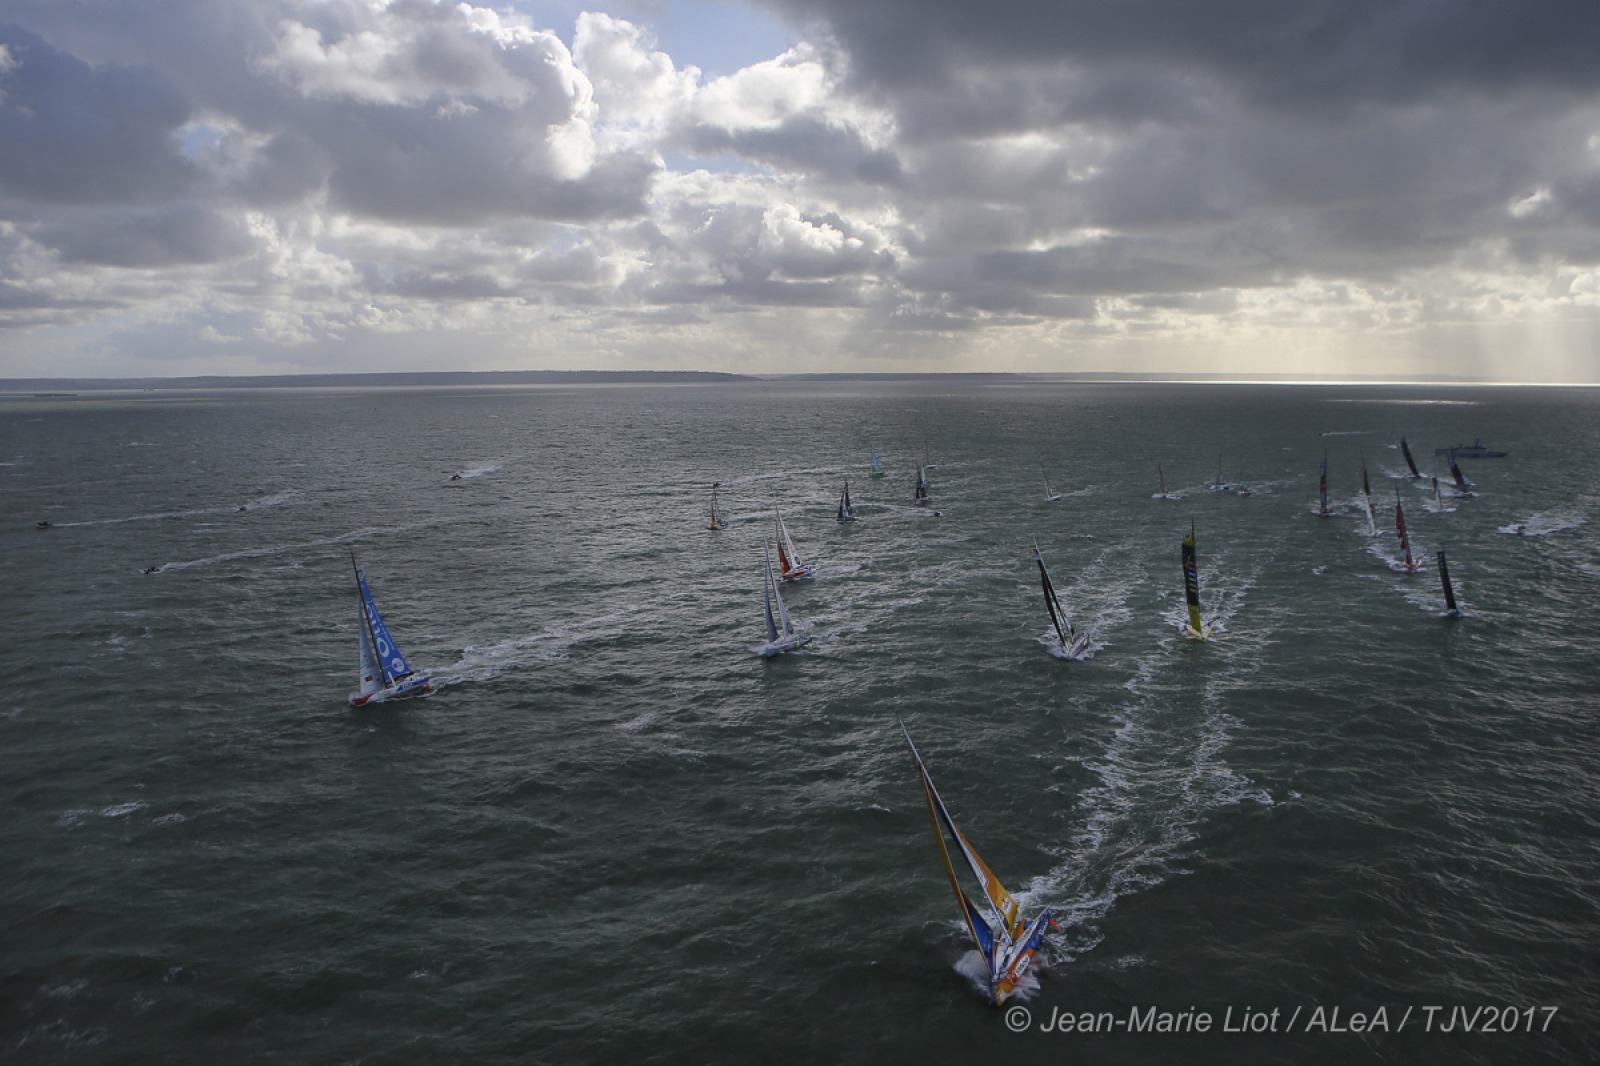 images/fiv/start-of-the-transat-jacques-vabre-2017-duo-sailing-r-1600-1200_0.jpg